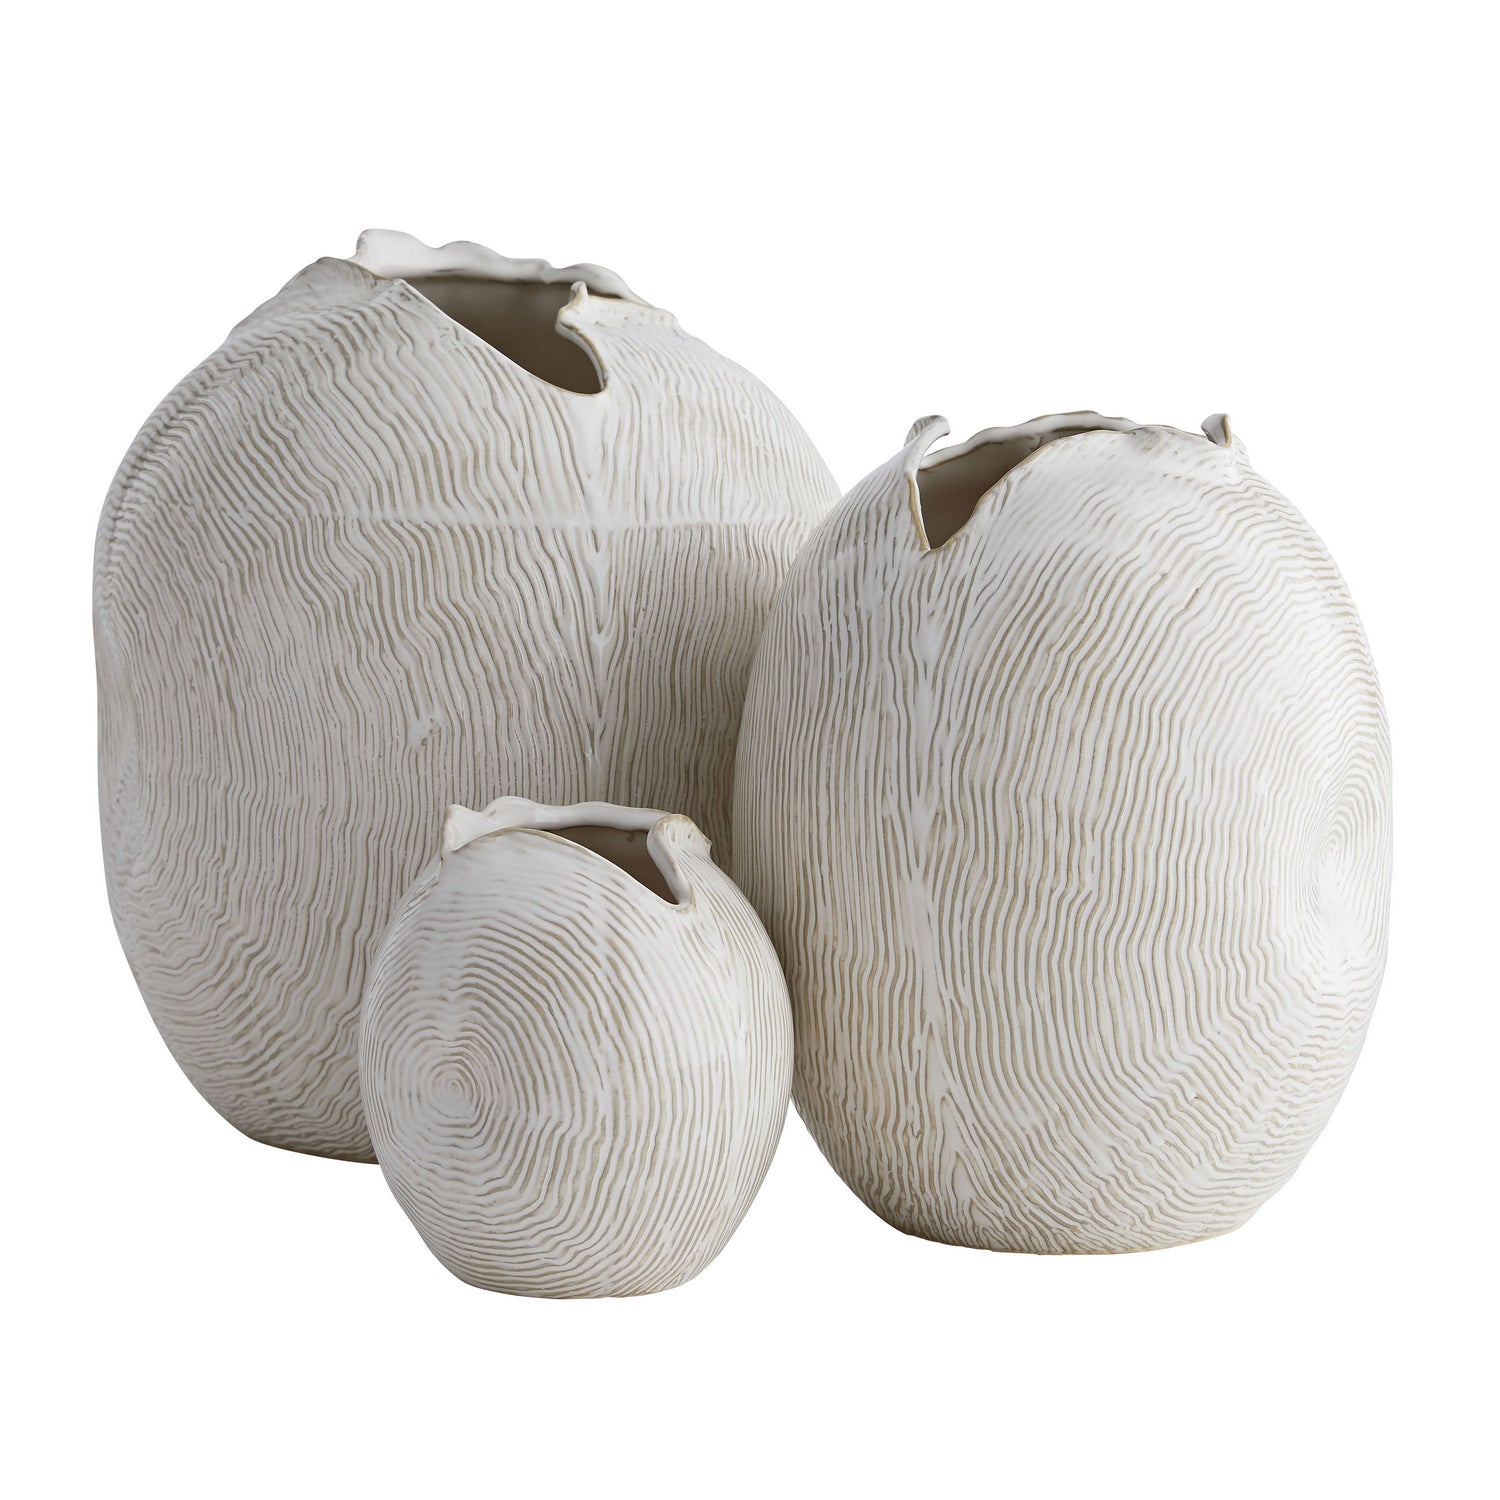 Vases Set of 3 from the Blume collection in White Wash finish